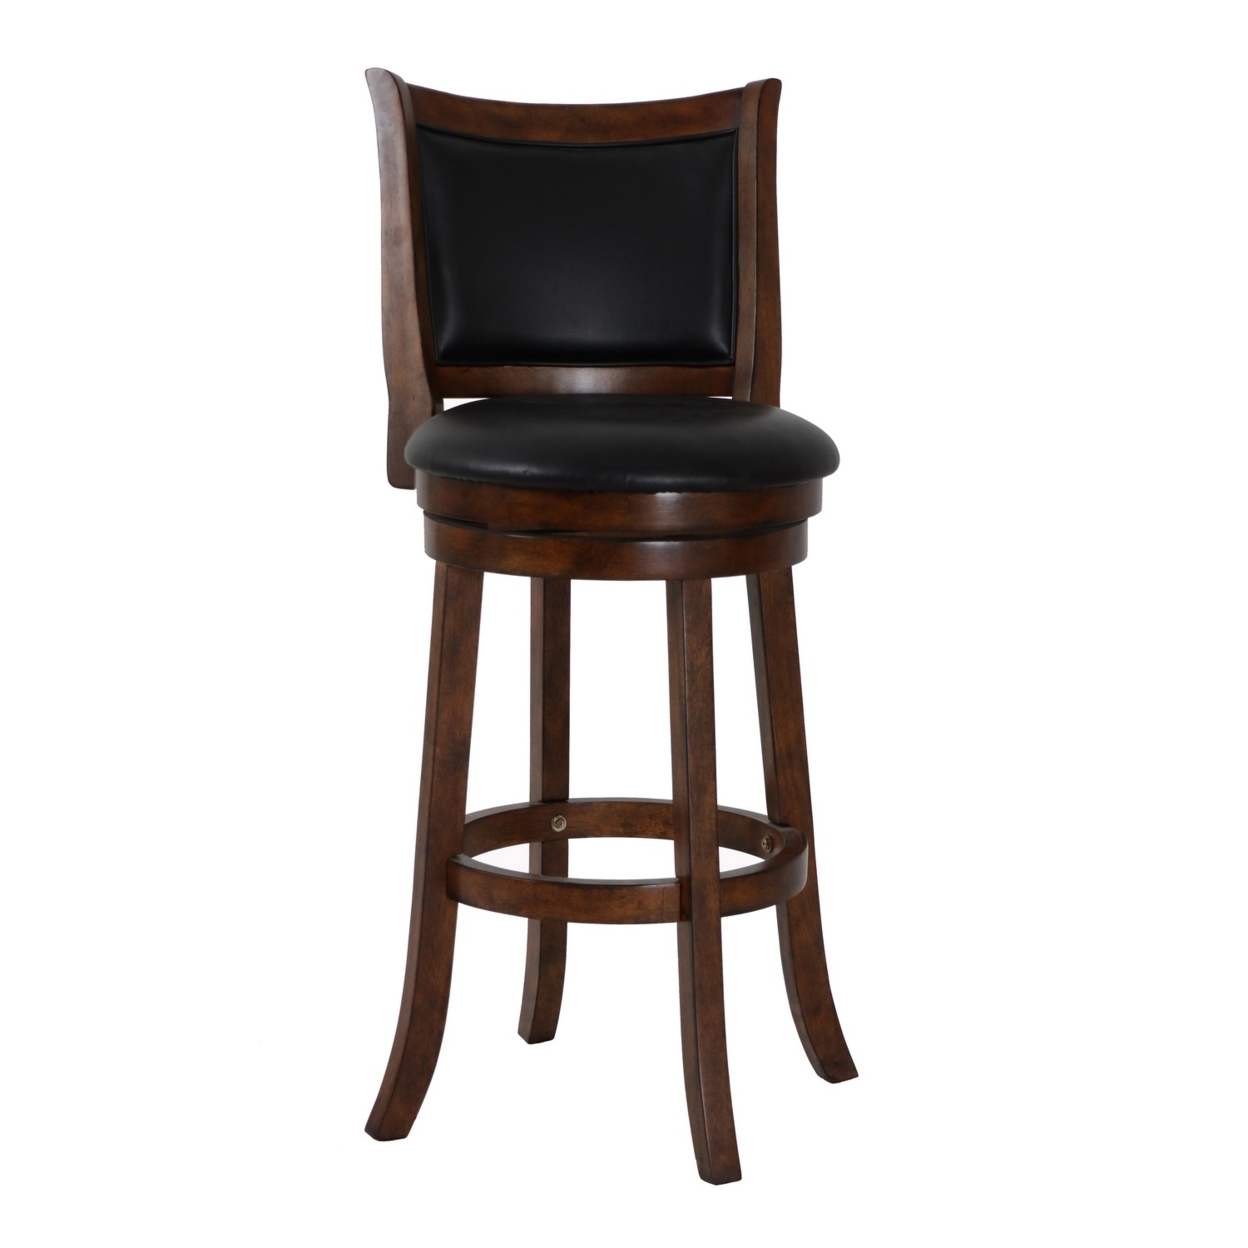 Curved Swivel Barstool With Leatherette Padded Seating, Brown And Black- Saltoro Sherpi